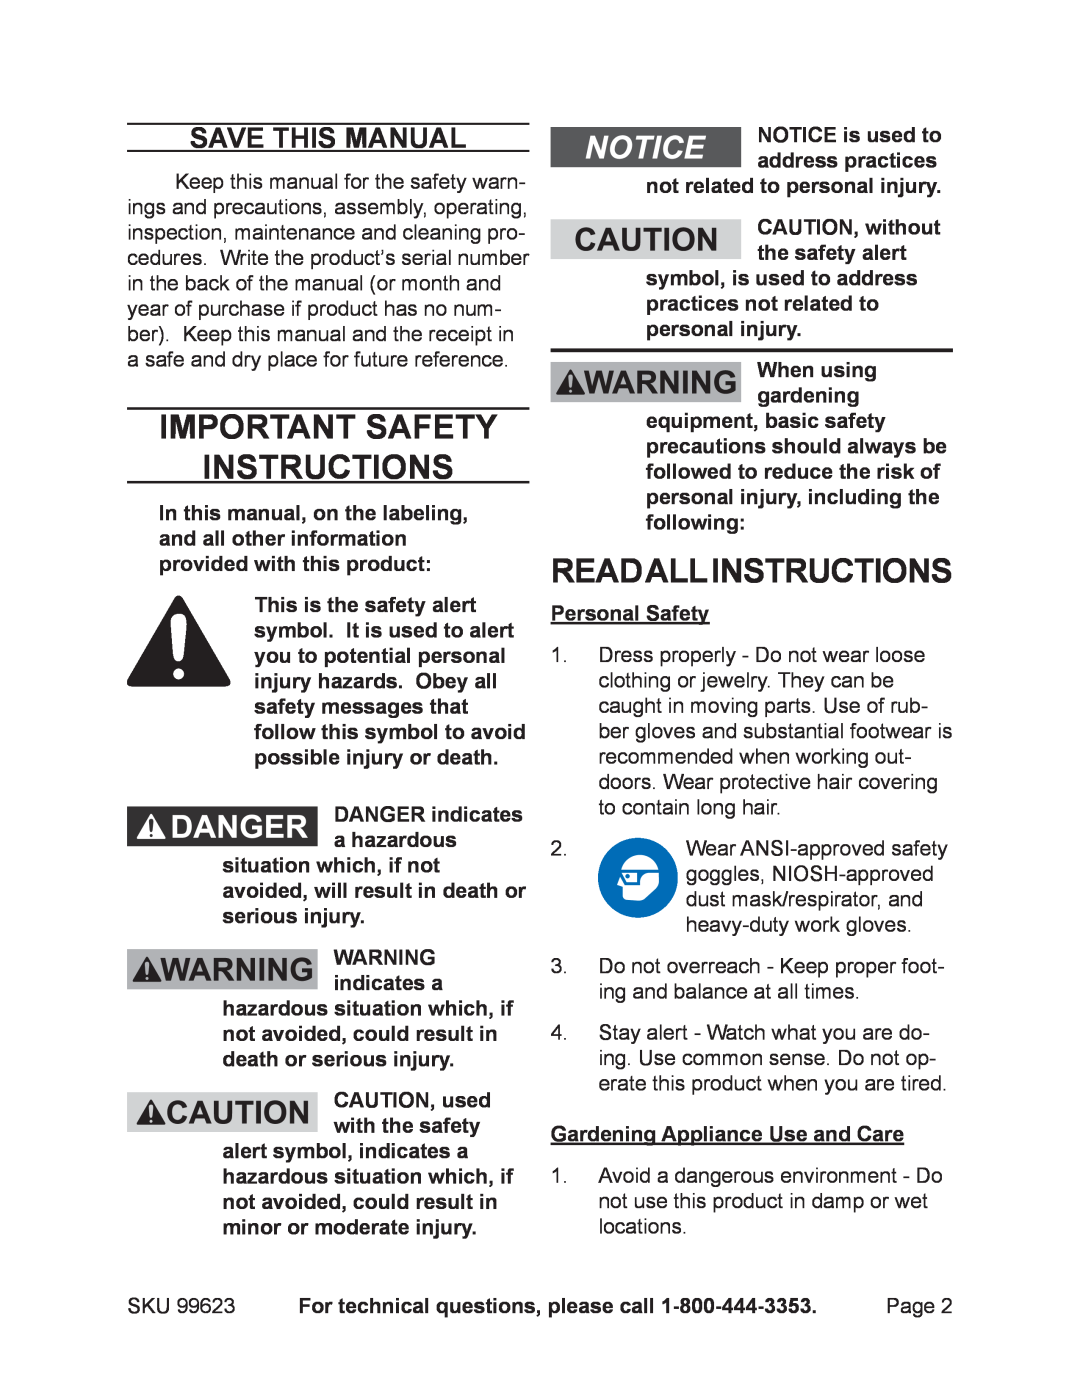 Harbor Freight Tools 99623 manual Important Safety Instructions, ReadAllInstructions, Save This Manual, WARNING indicates a 